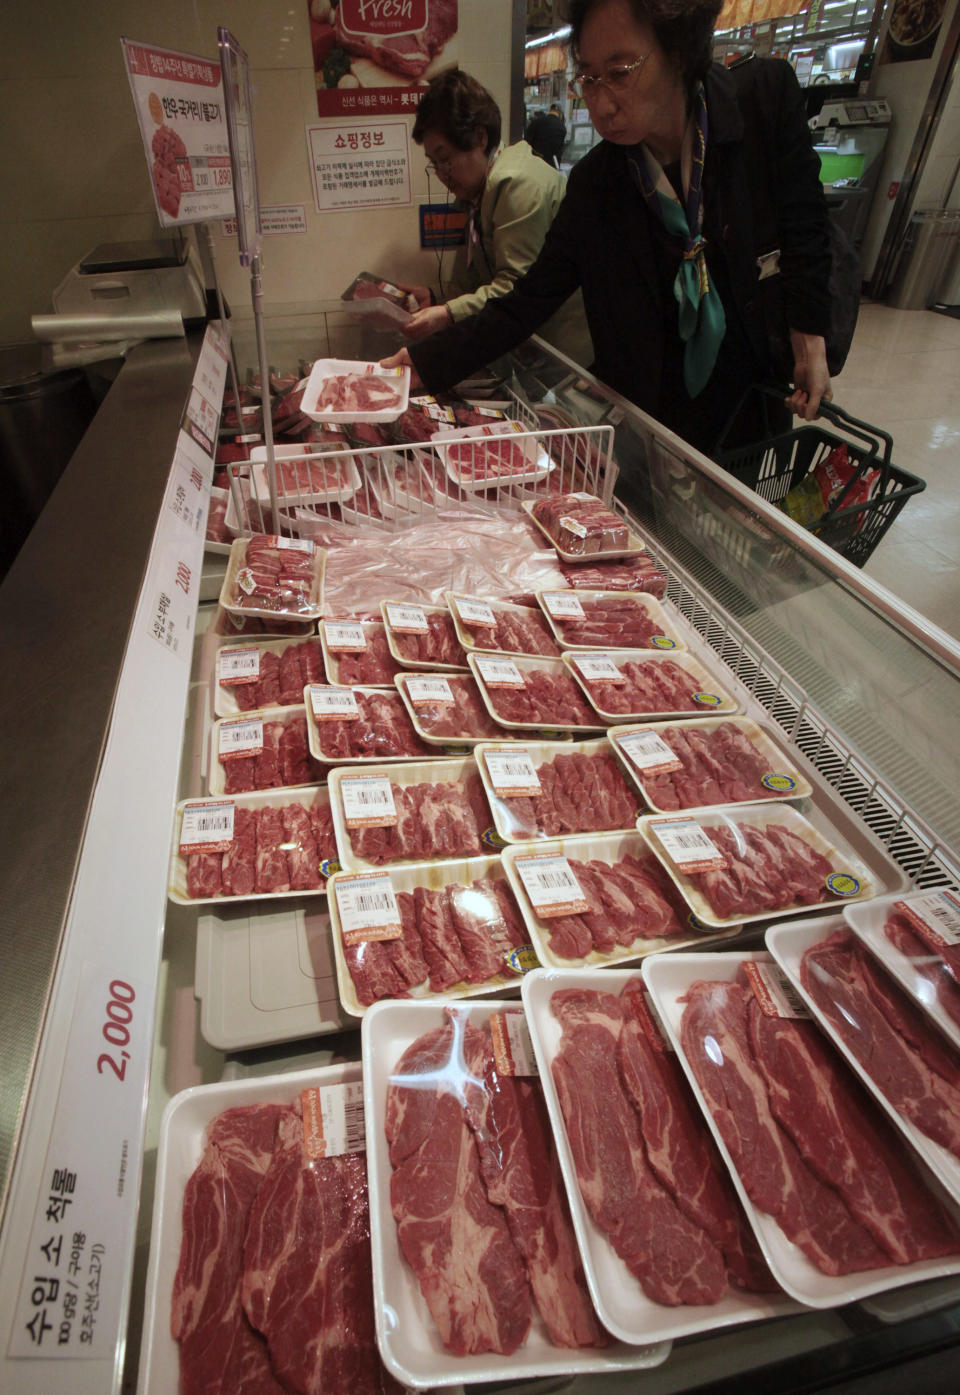 South Korean women watch to buy domestic beef as Australian beef is displayed, bottom, on the shelves at a Lotte Mart store in Seoul, South Korea, Wednesday, April 25, 2012. Two major South Korean retailers including Lotte Mart, suspended sales of U.S. beef Wednesday following the discovery of mad cow disease in a U.S. dairy cow. Reaction elsewhere in Asia was muted with Japan saying there's no reason to restrict imports. (AP Photo/Ahn Young-joon)